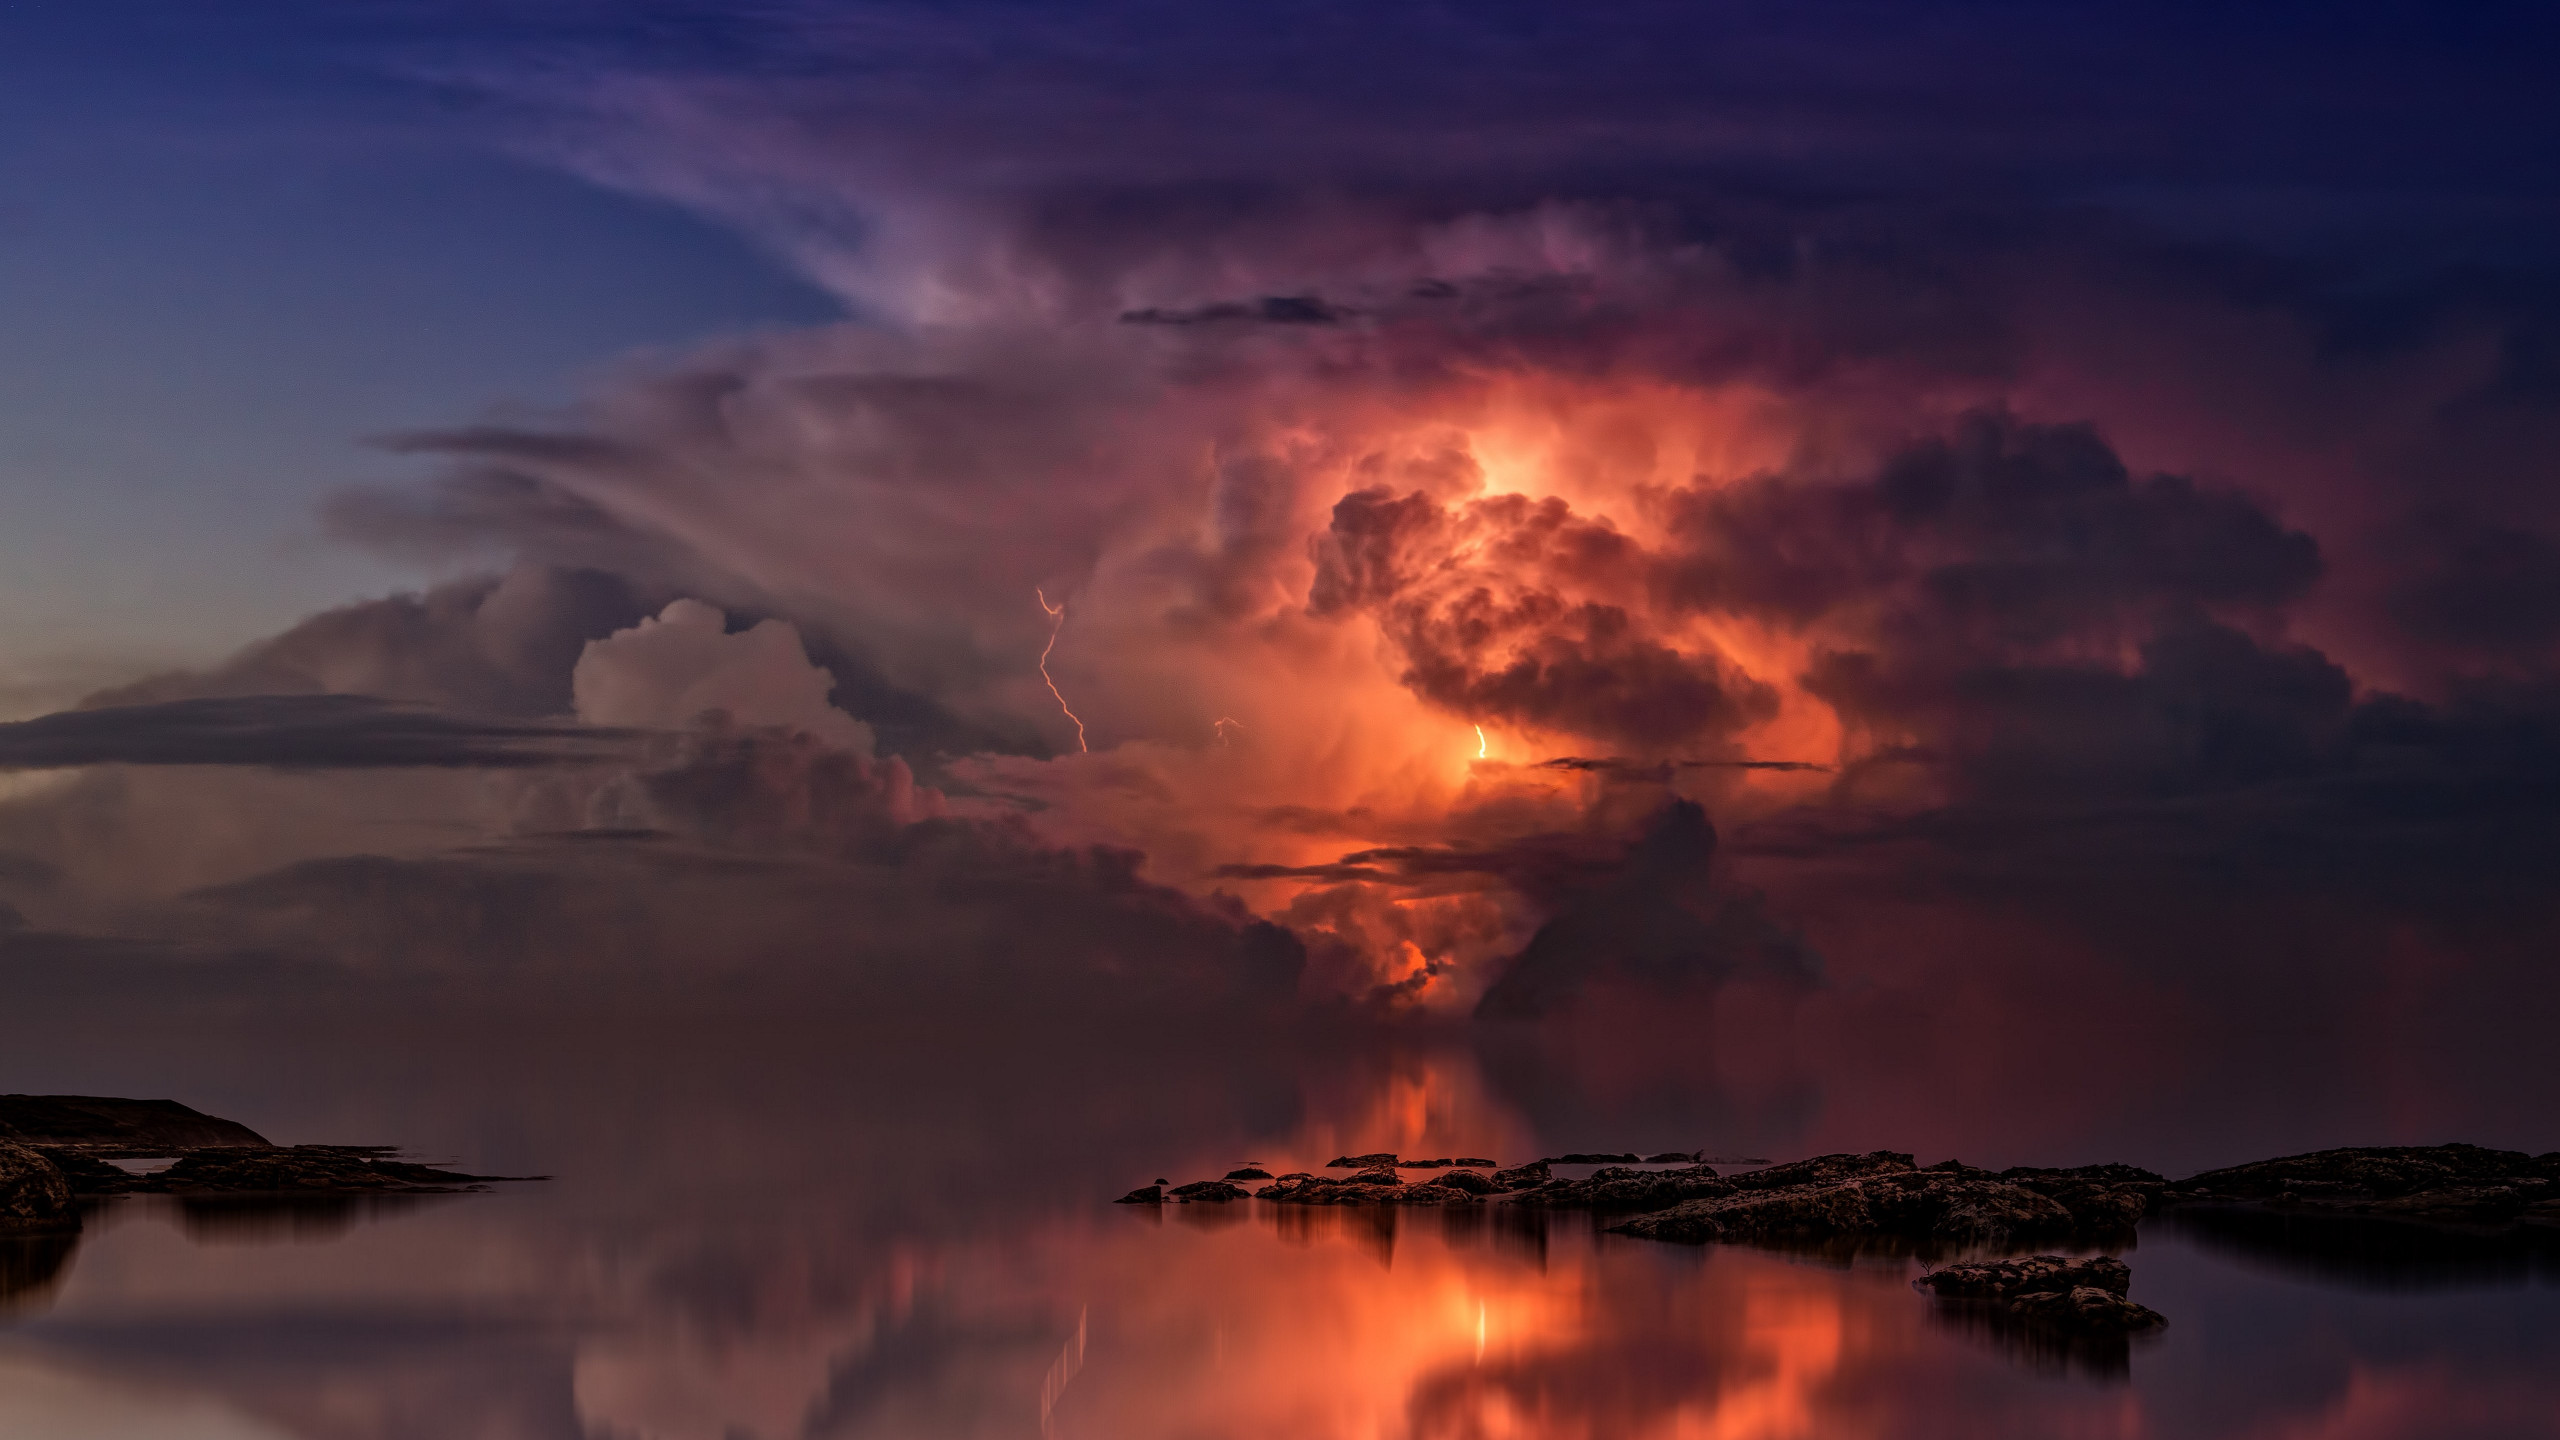 Lightning and thunderstorm in the sky wallpaper 2560x1440